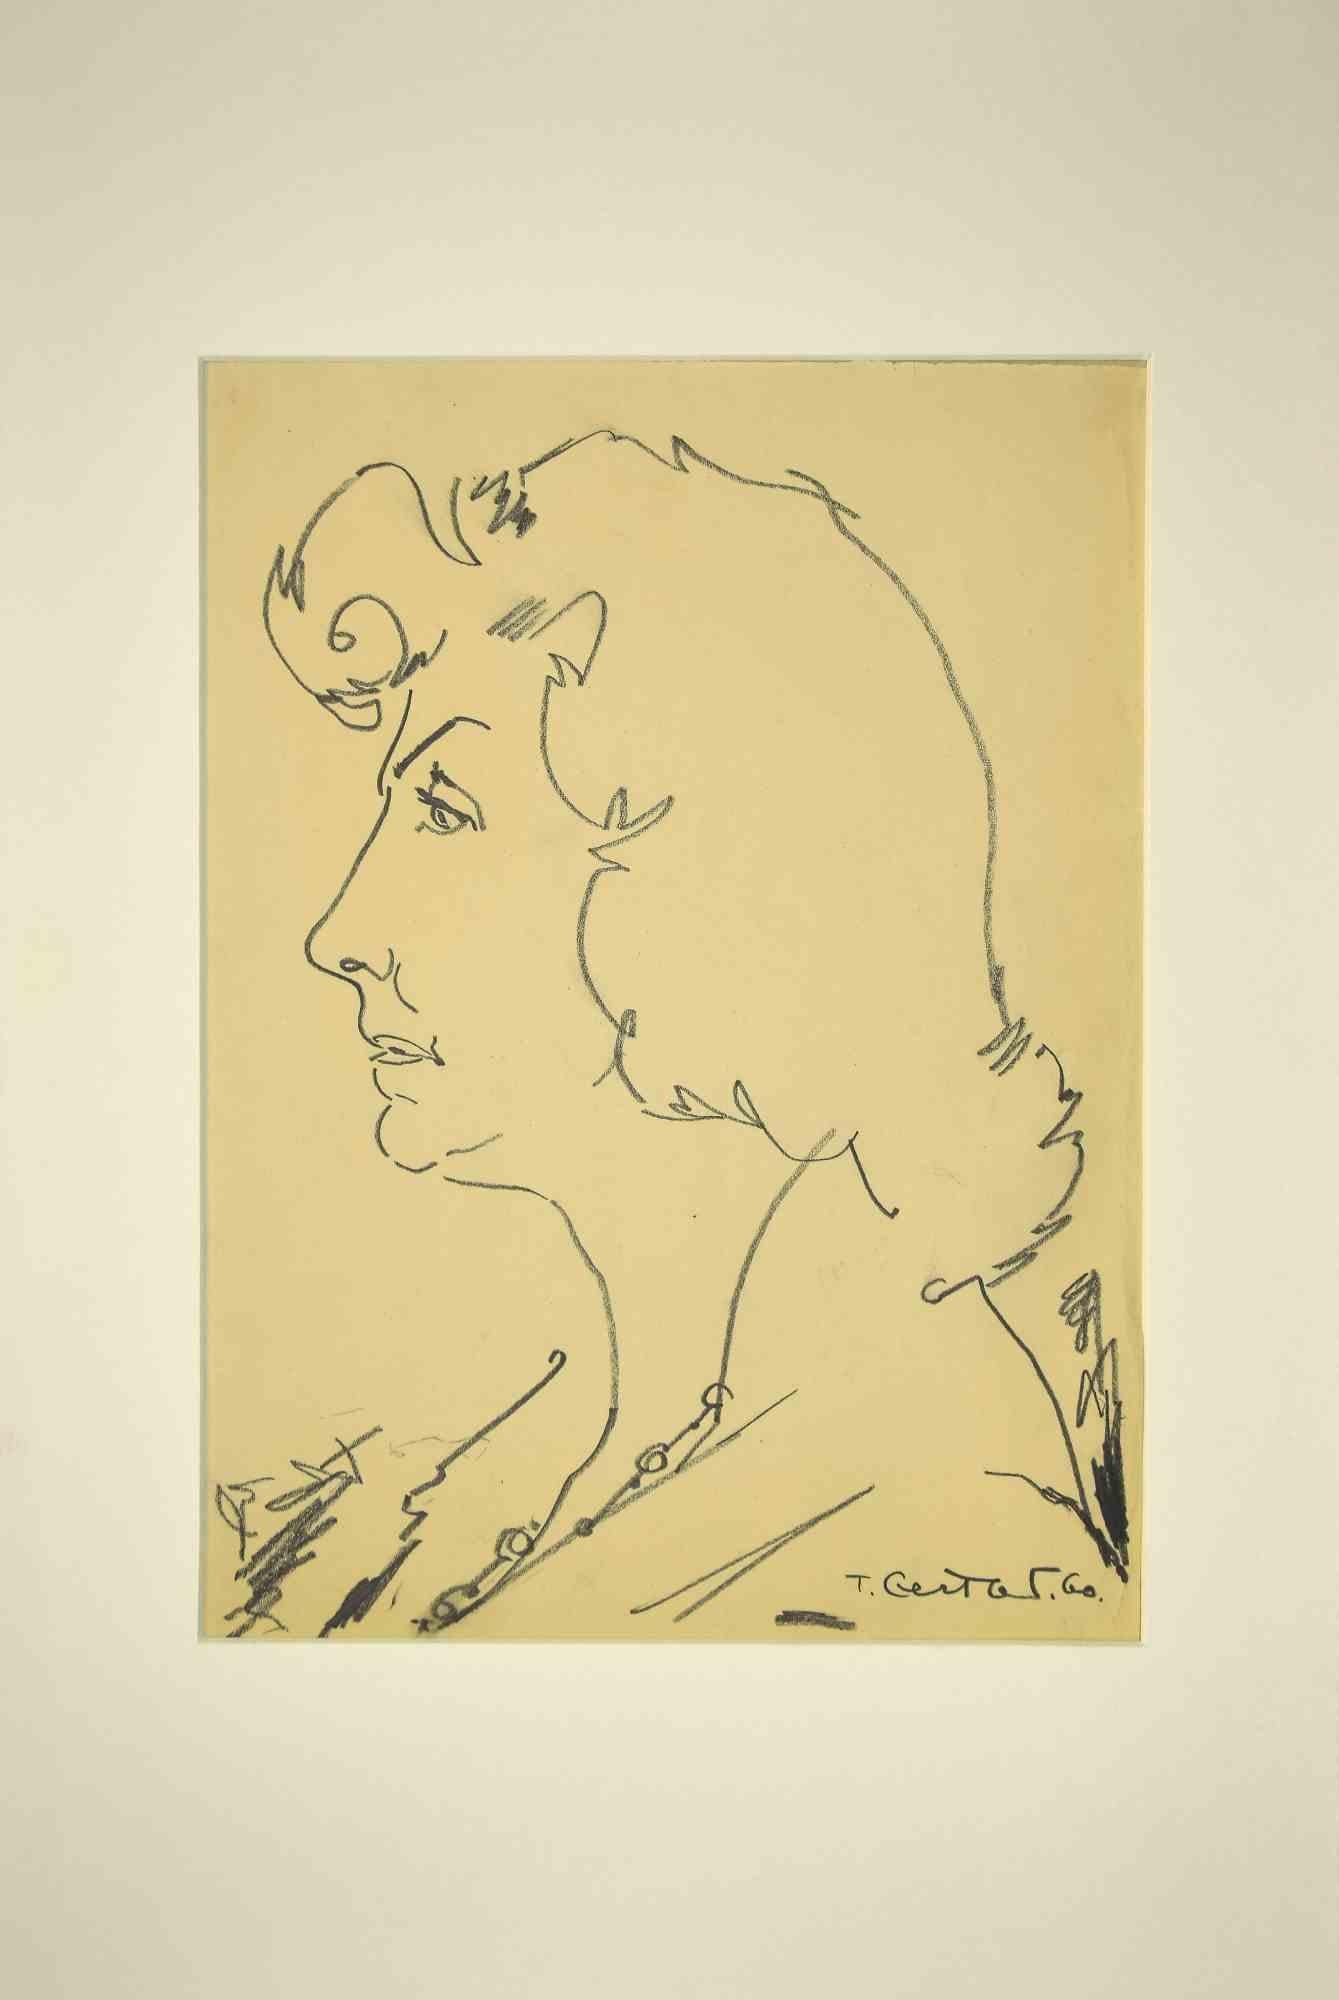 Portrait is an original pencil drawing realized by Tibor Gertler in 1960.

Good conditions, mounted on a white cardboard passpartout (60x40 cm).

Hand-signed by the artist on the lower right corner.

Tibor Gertler (1902-1991) was a Hungarian painter